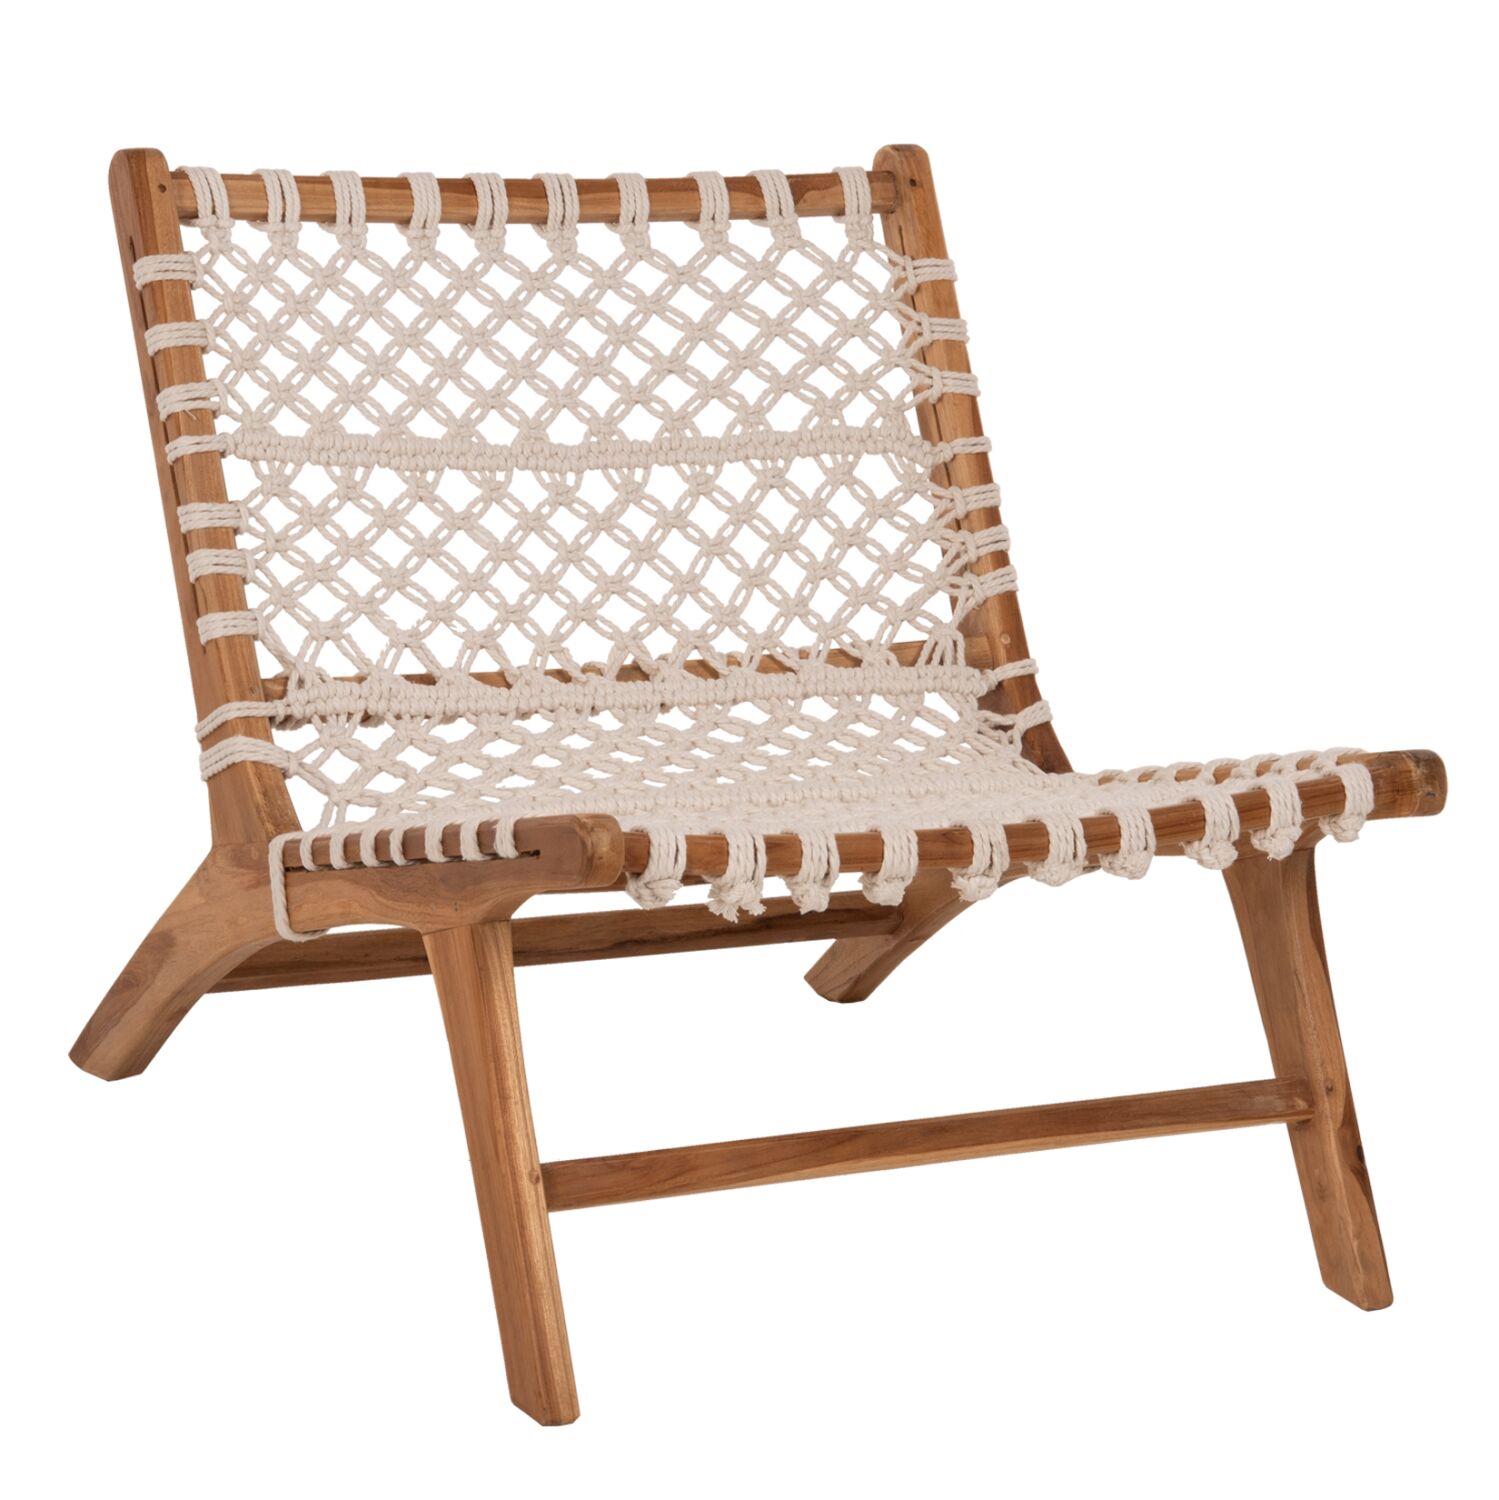 CHAIR TEAK WOOD NATURAL AND ROPE WHITE 65x78x68Hcm.HM9466.01